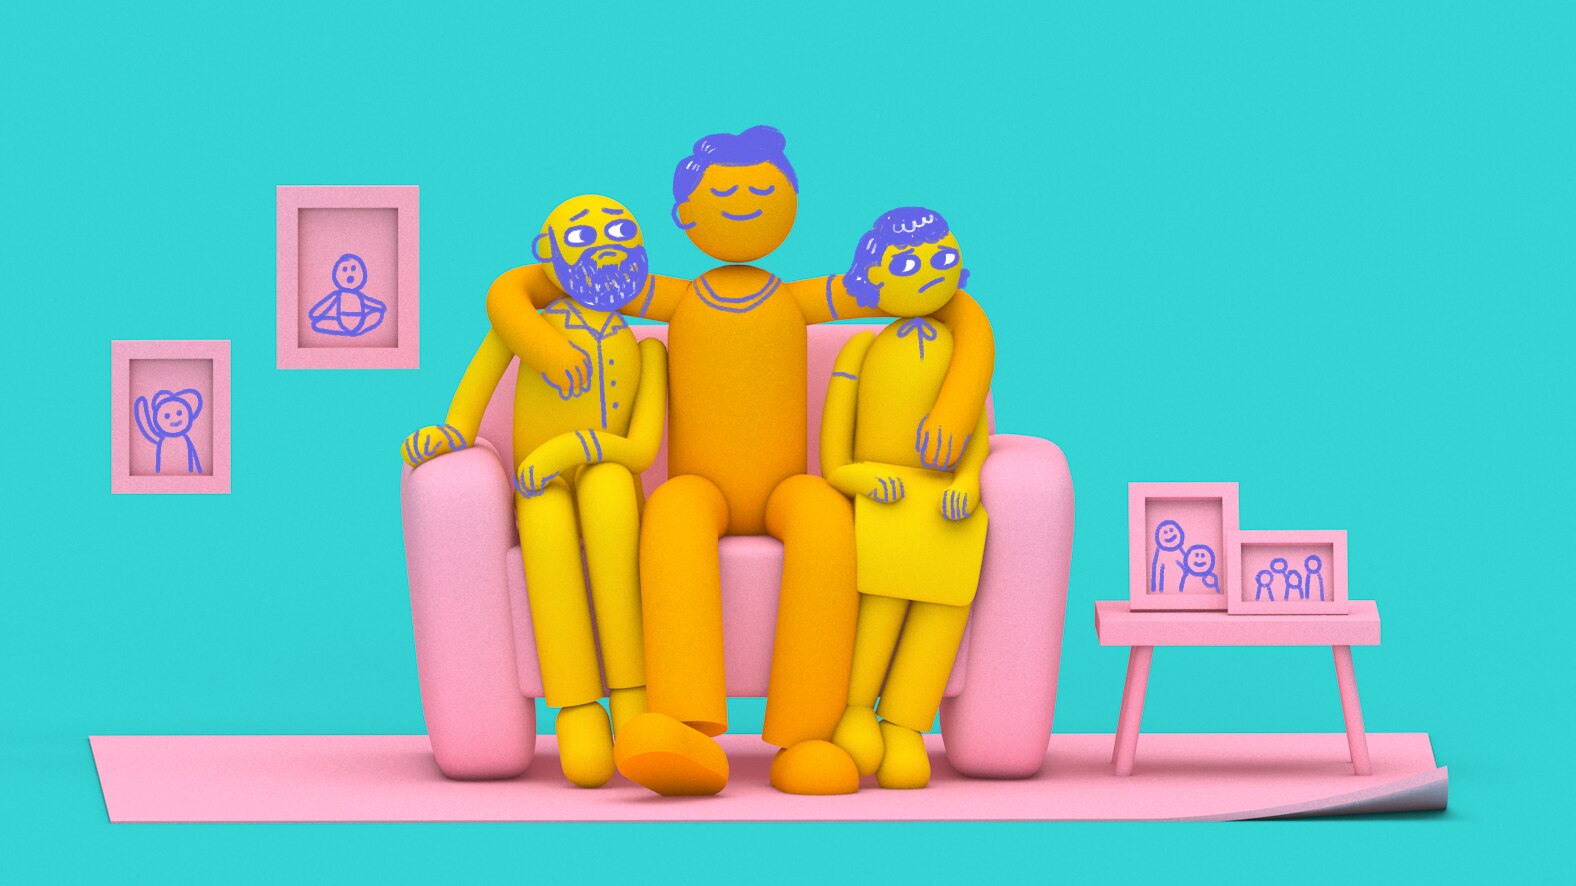 Illustration of a grown son and parents sitting on a couch to depict the rising trend of intergenerational living.